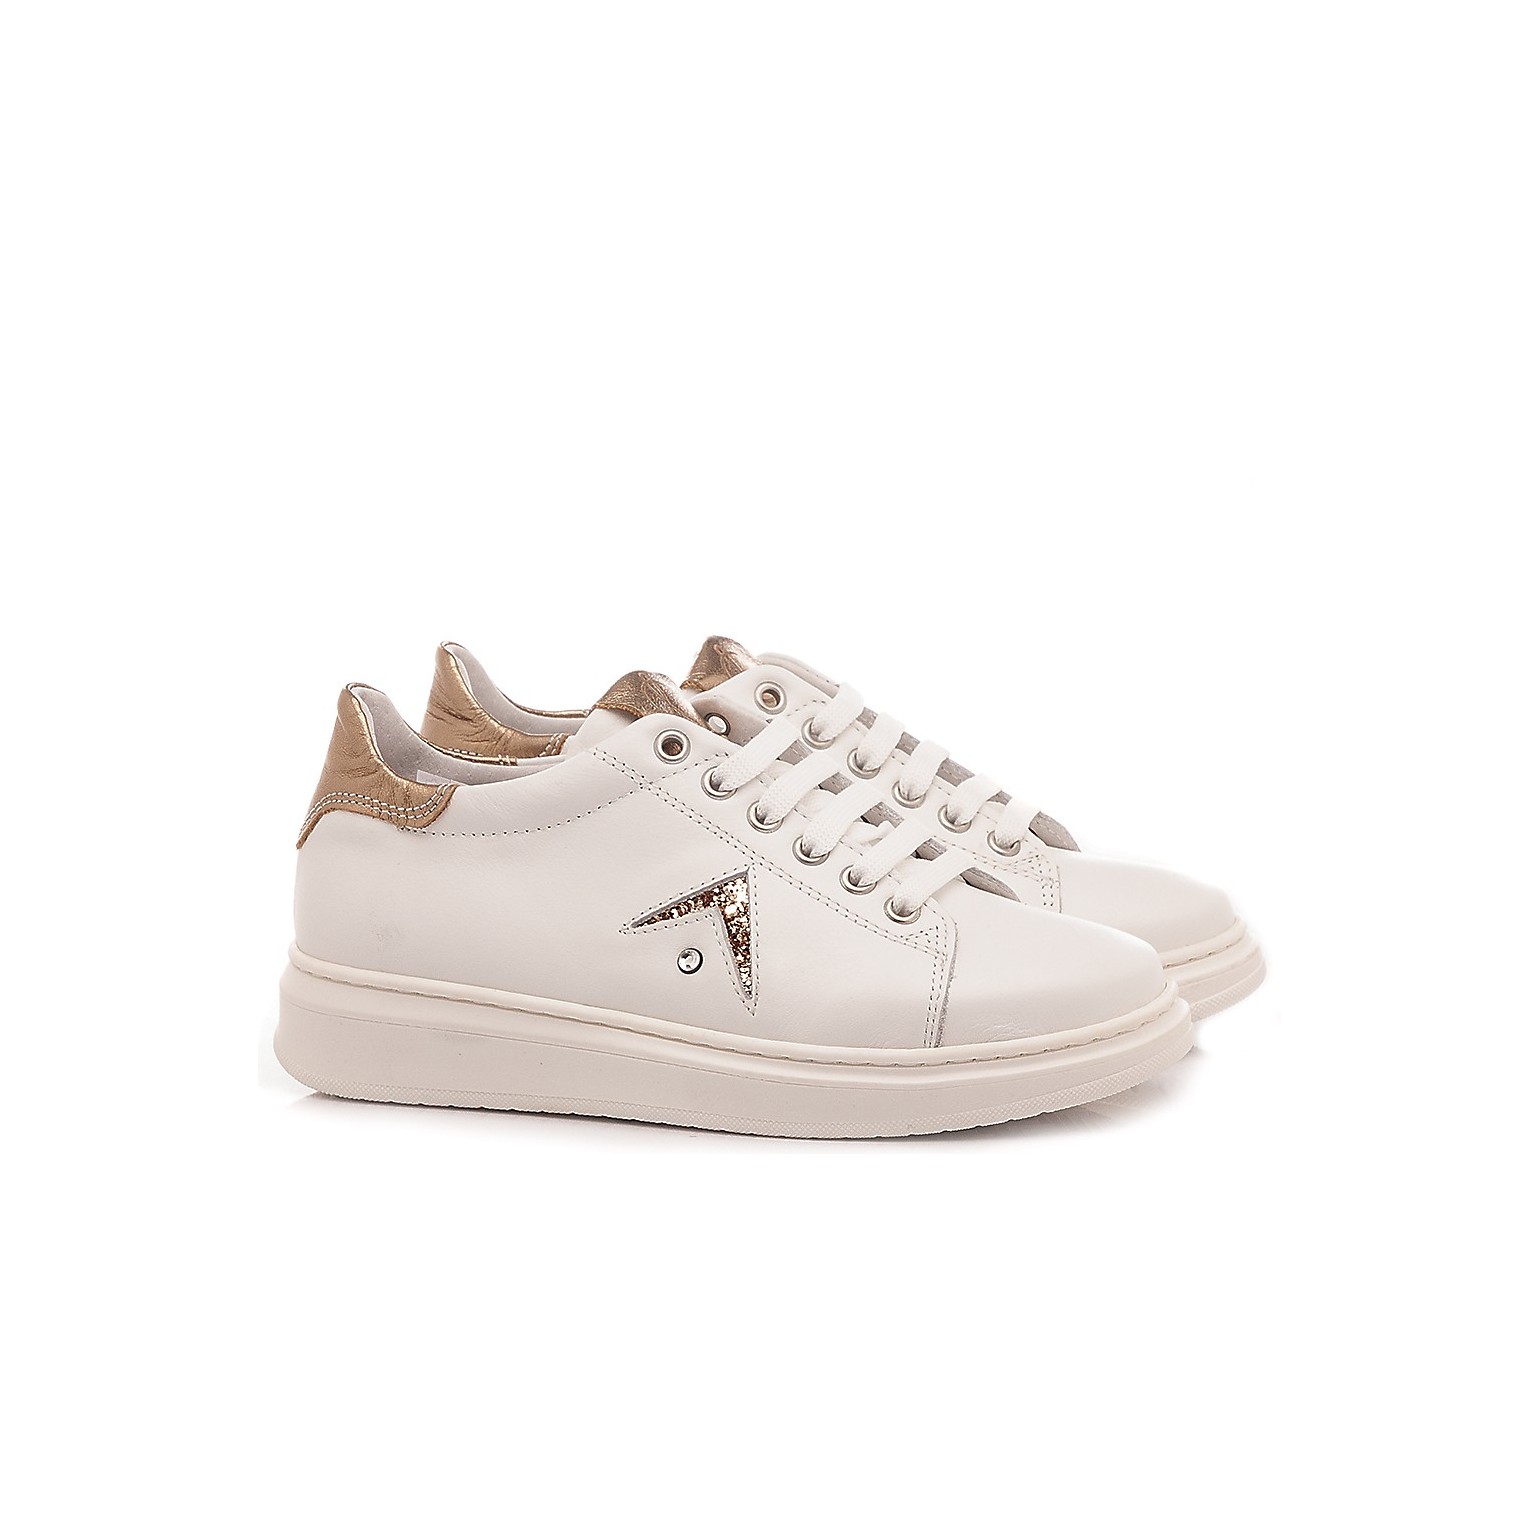 Chiara Luciani Children's Shoes Sneakers 106 White -Gold